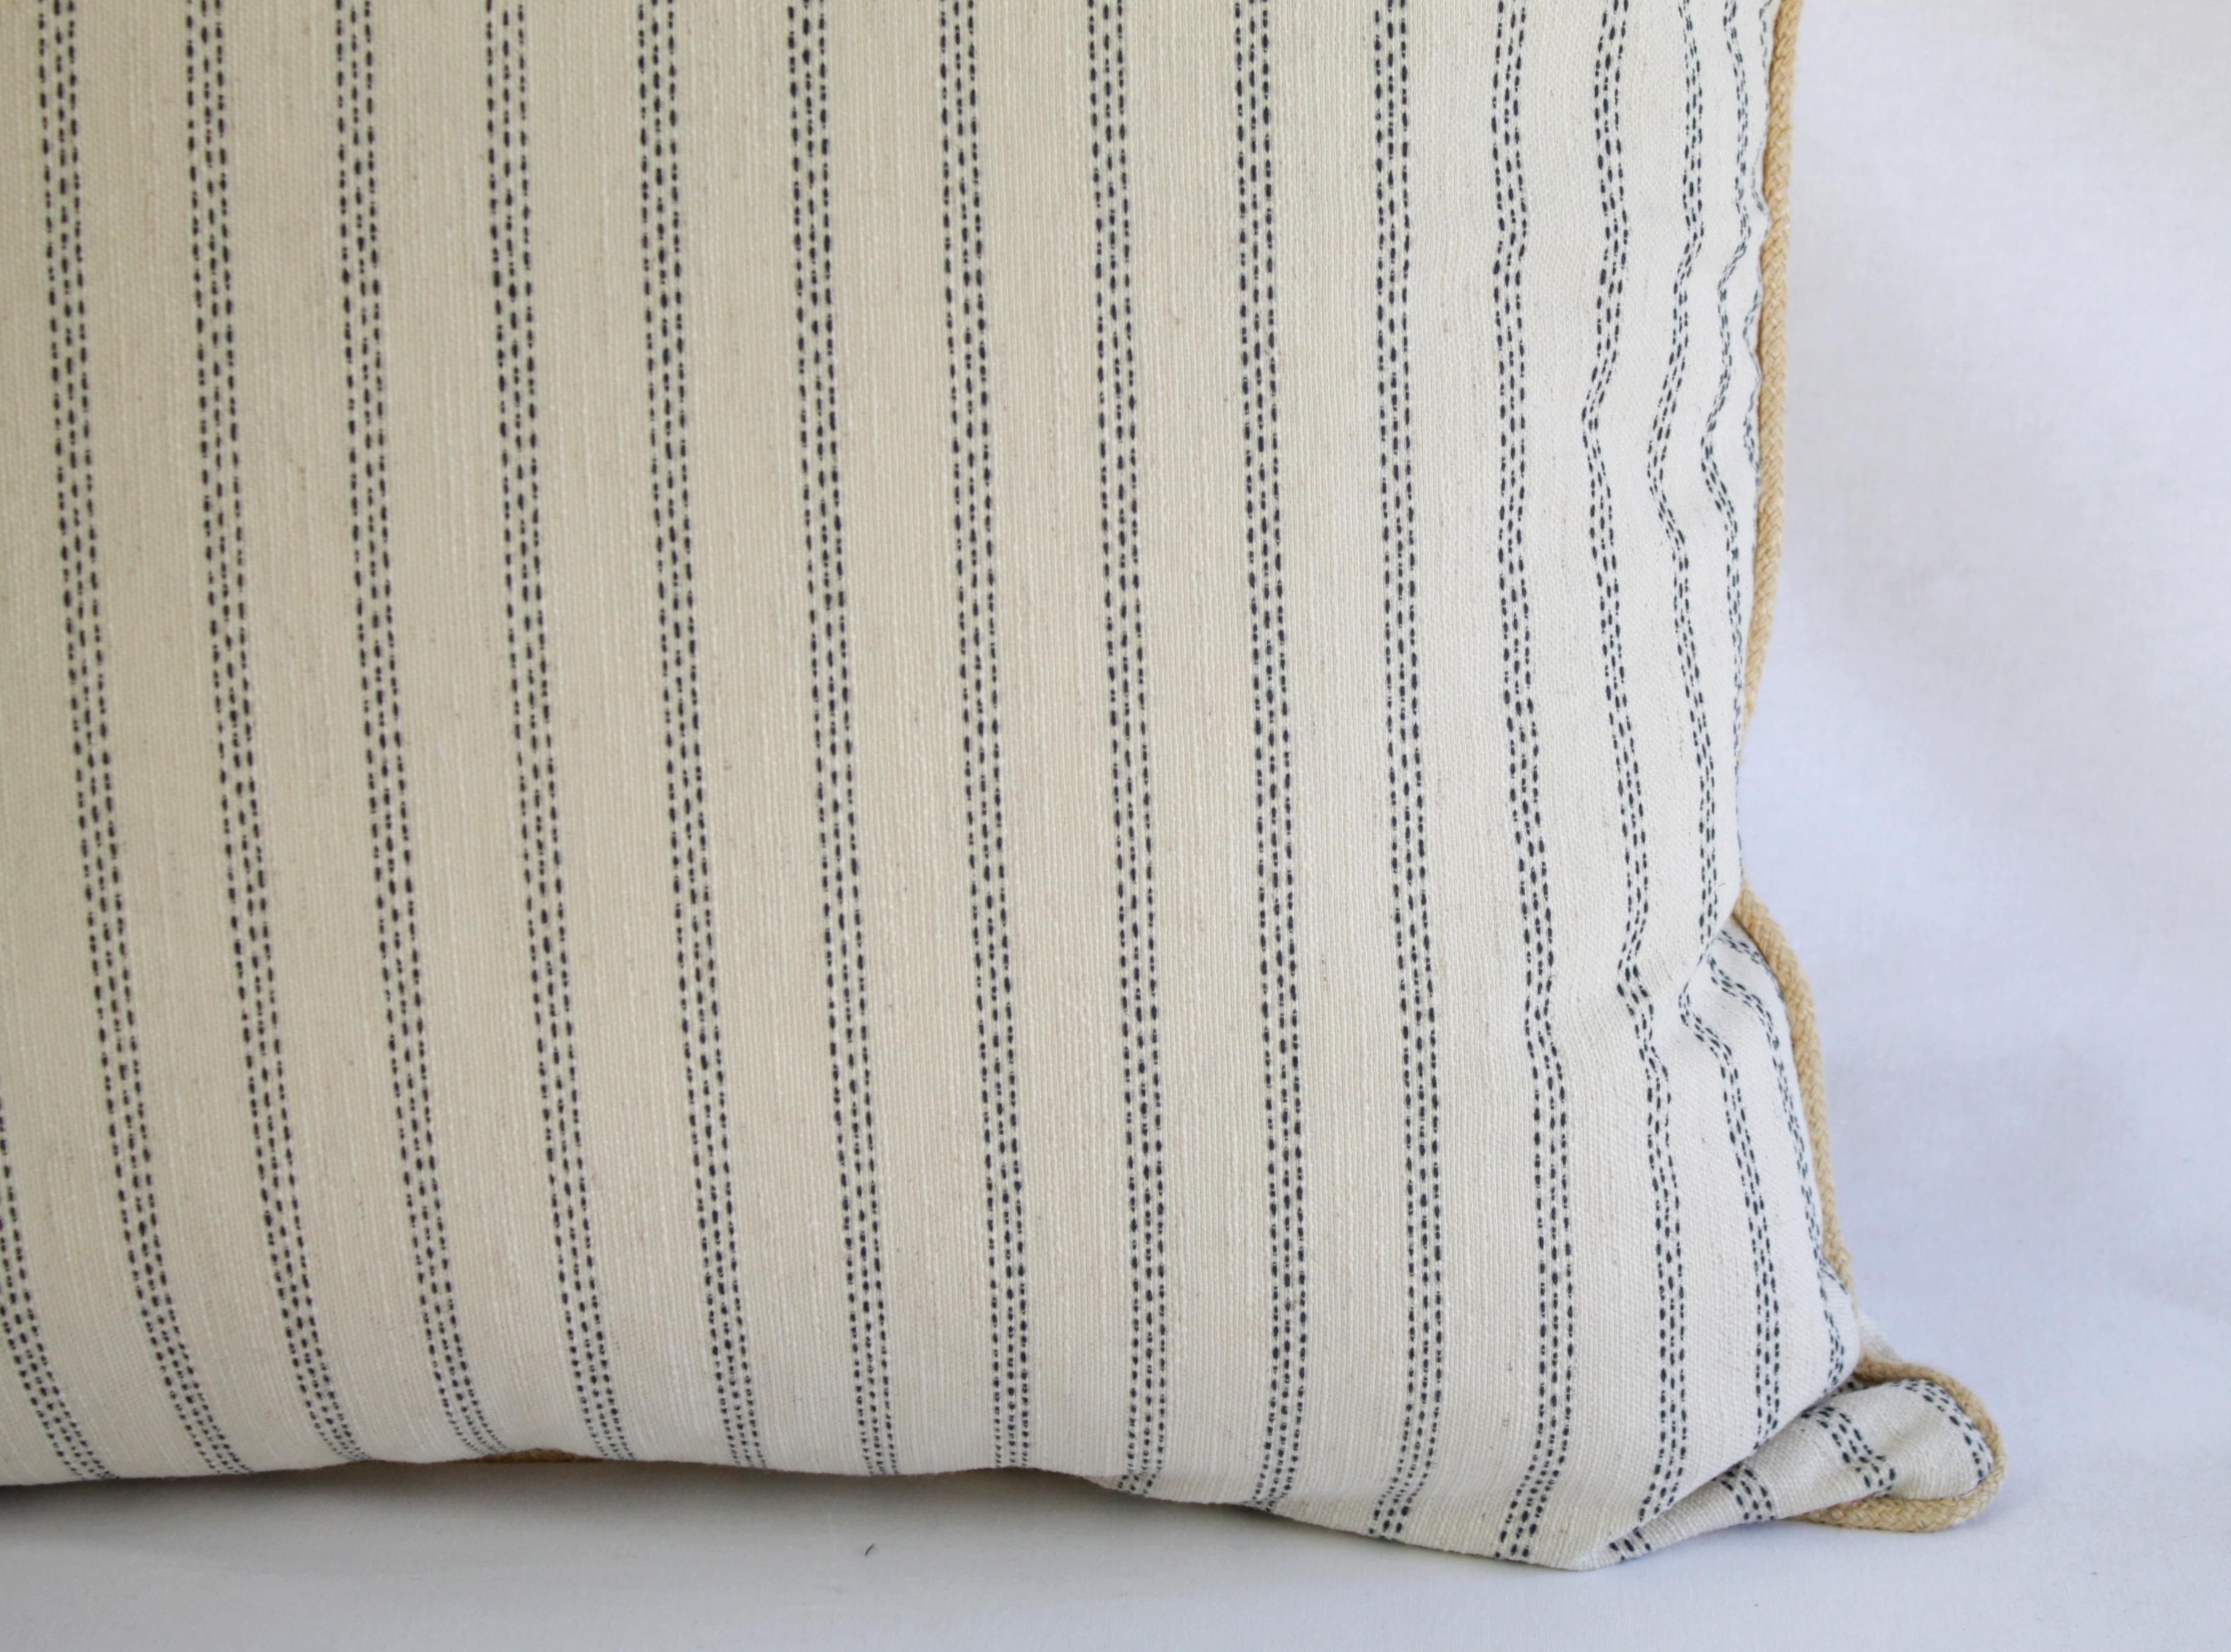 Custom Natural and Navy Ticking Stripe Pillow with Braided Jute Cord 6